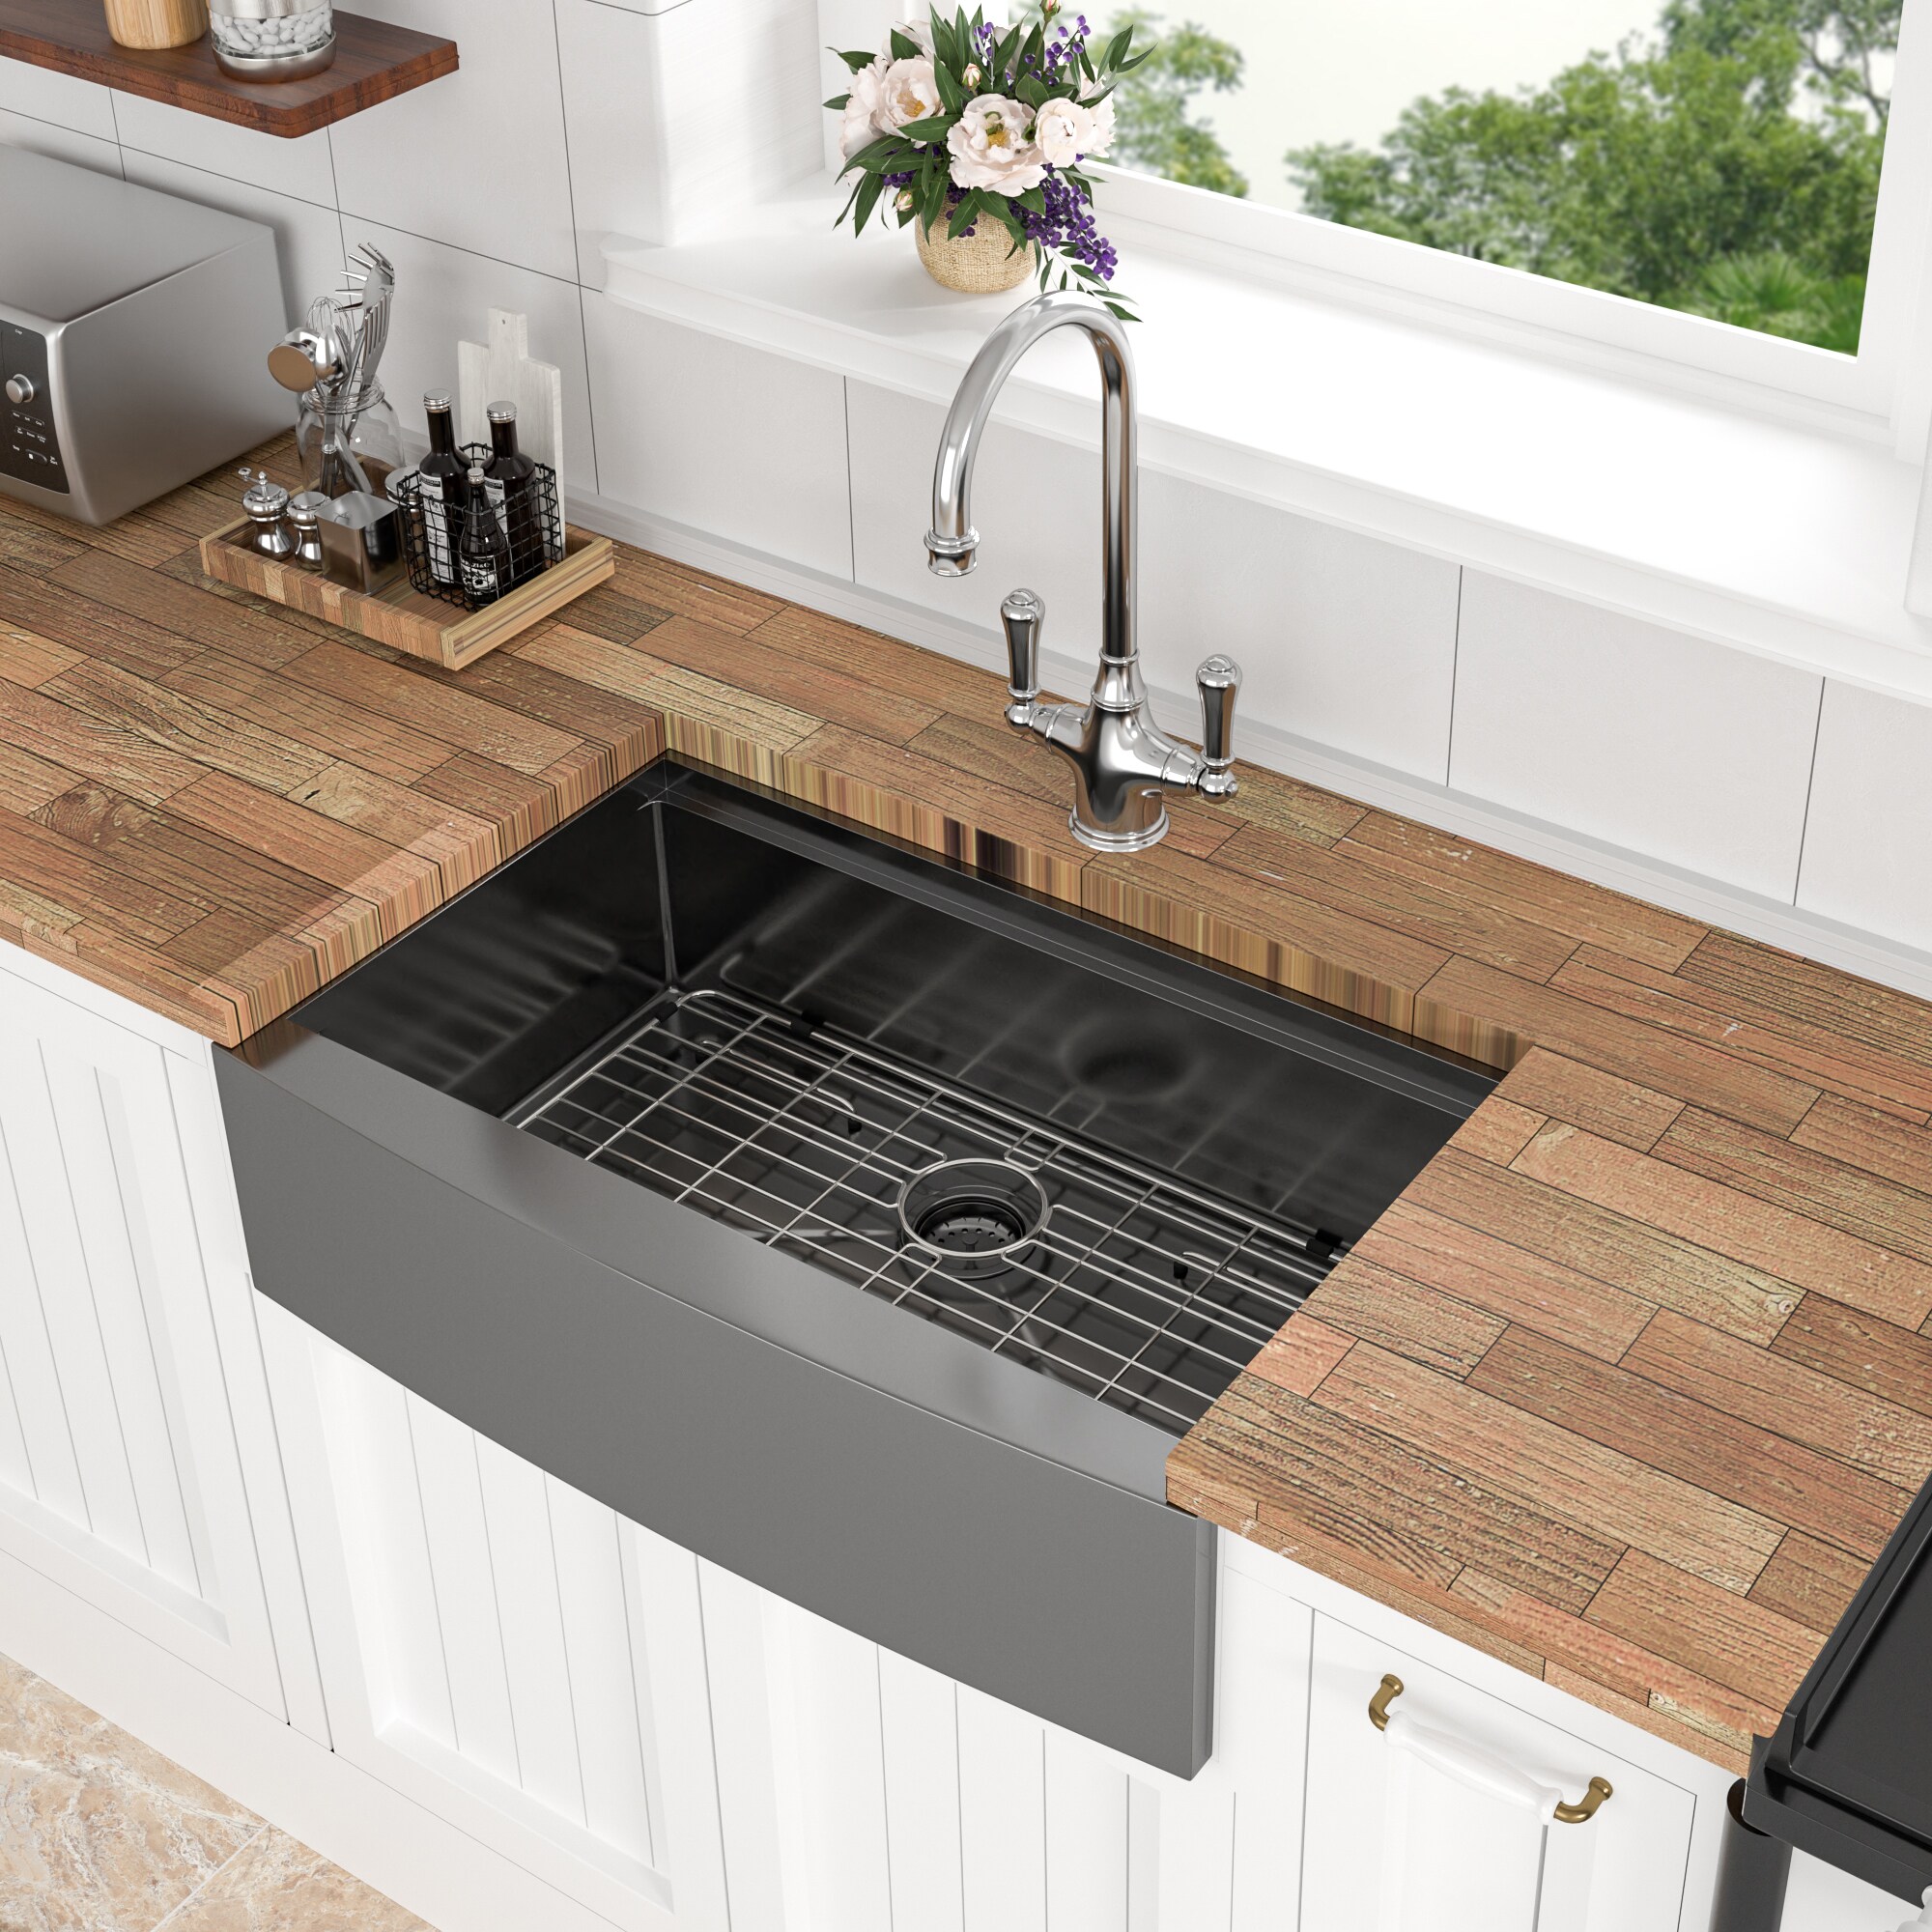 Lordear Farmhouse Kitchen Sink with Step Farmhouse Apron Front 30-in x ...